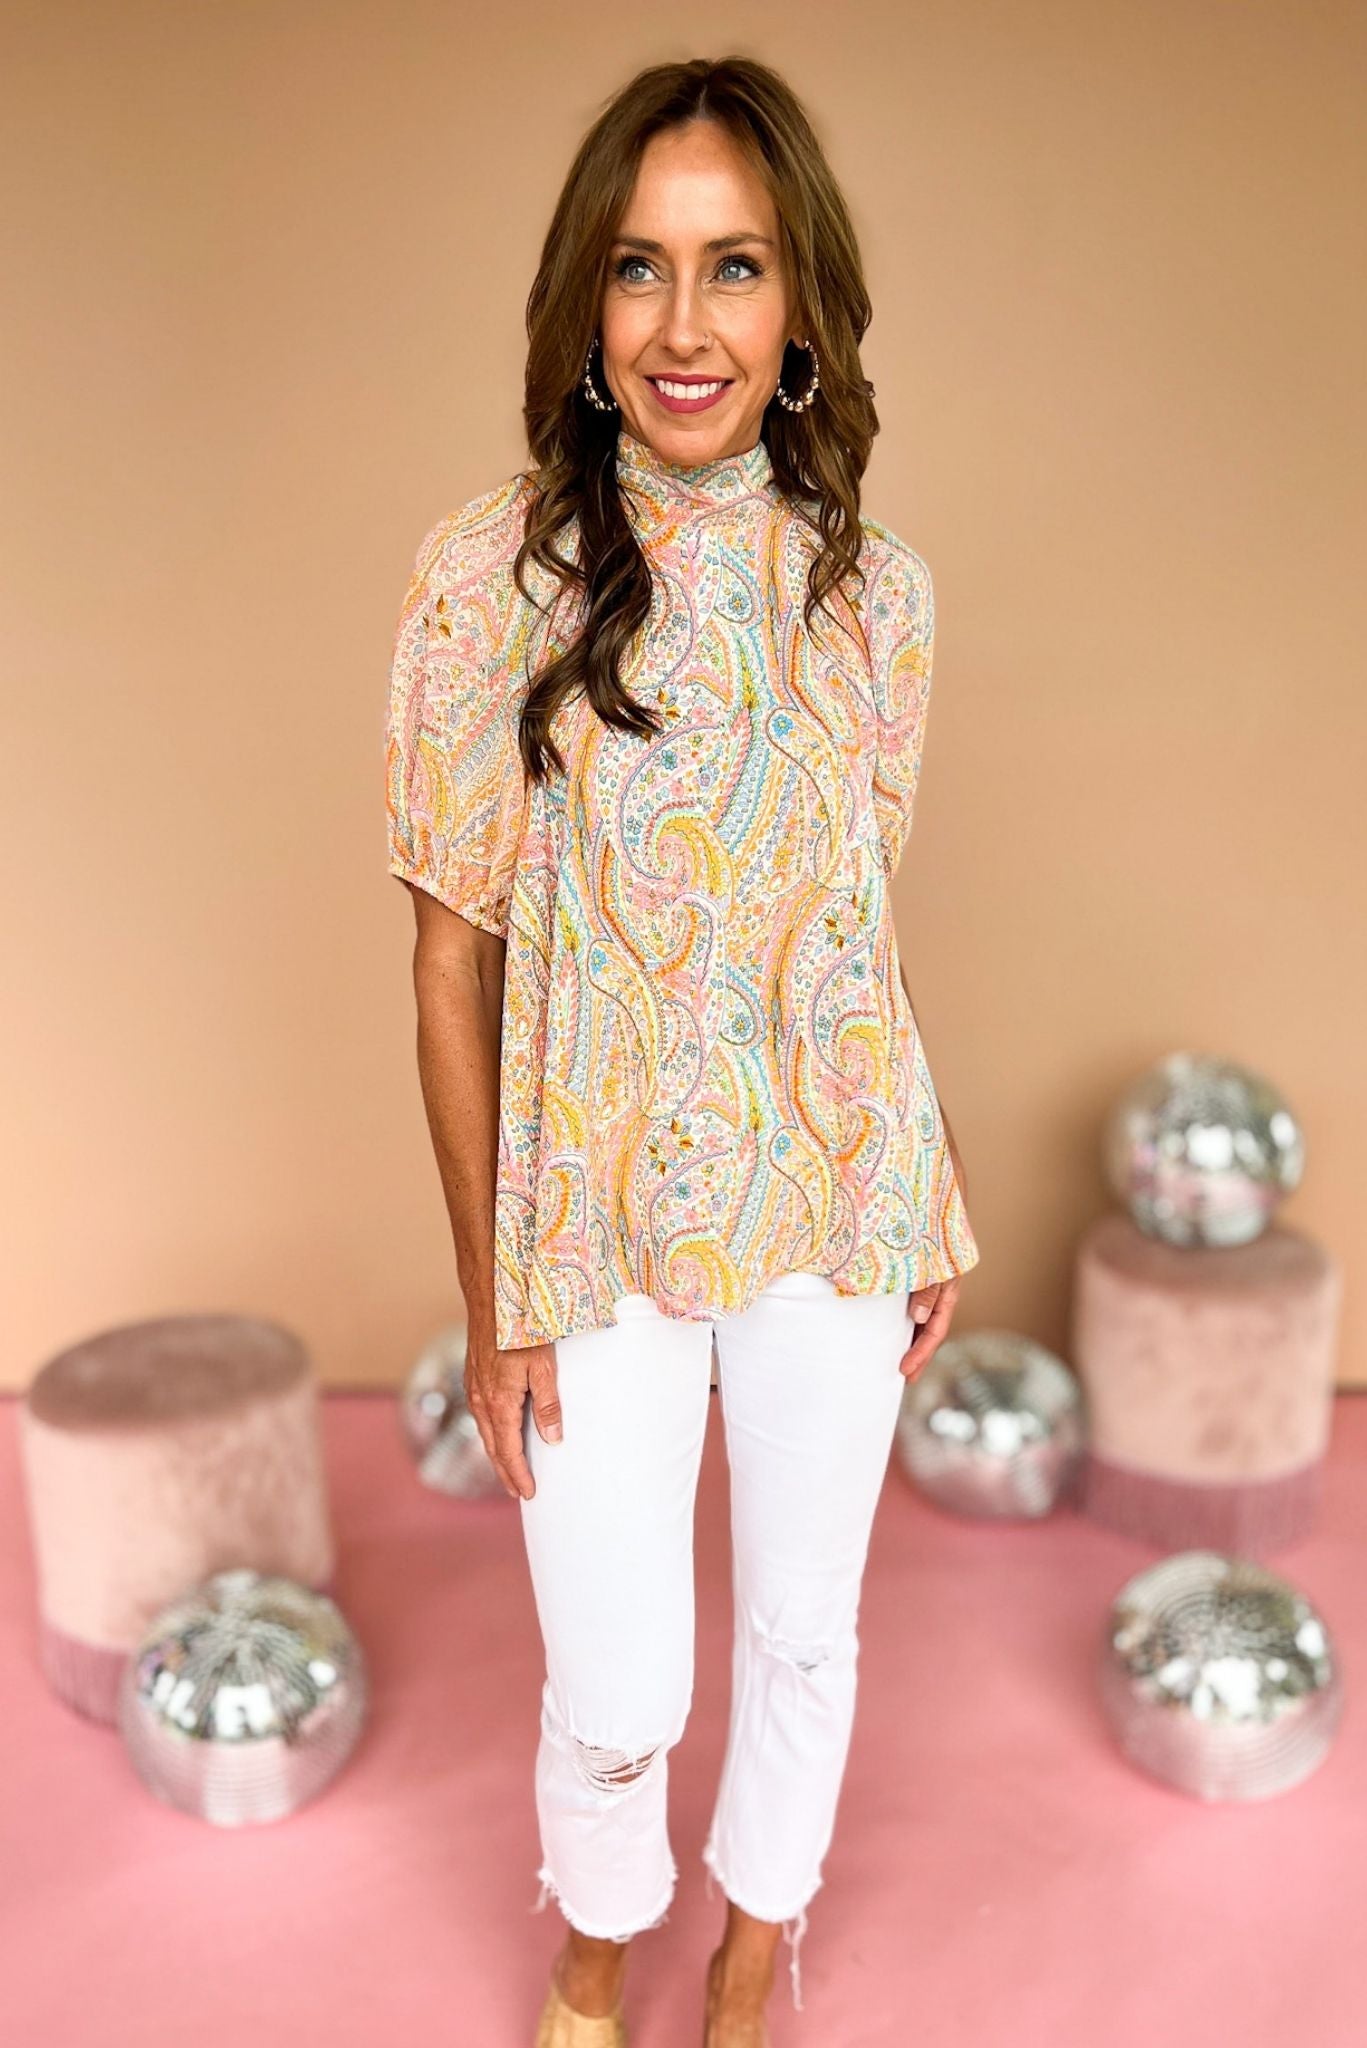 Load image into Gallery viewer, Orange Paisley Printed Mock Neck Puff Short Sleeve Top, puff sleeve, paisley print, neck tie, flowy fit, new arrival, shop style your senses by mallory fitzsimmons
